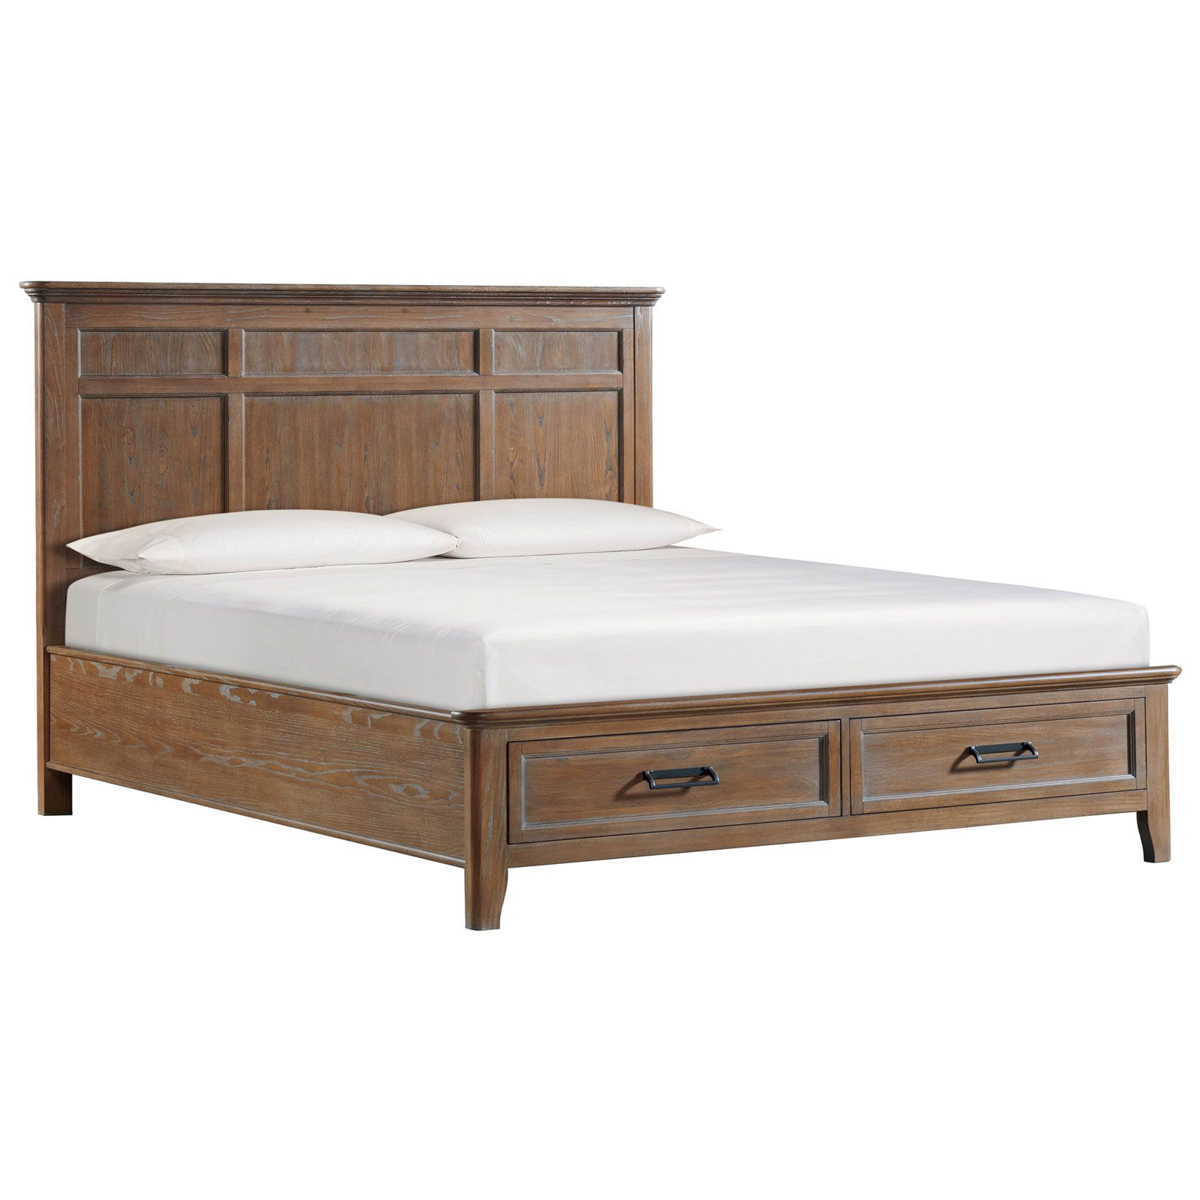 Picture of Alta Harvest King Storage Bed